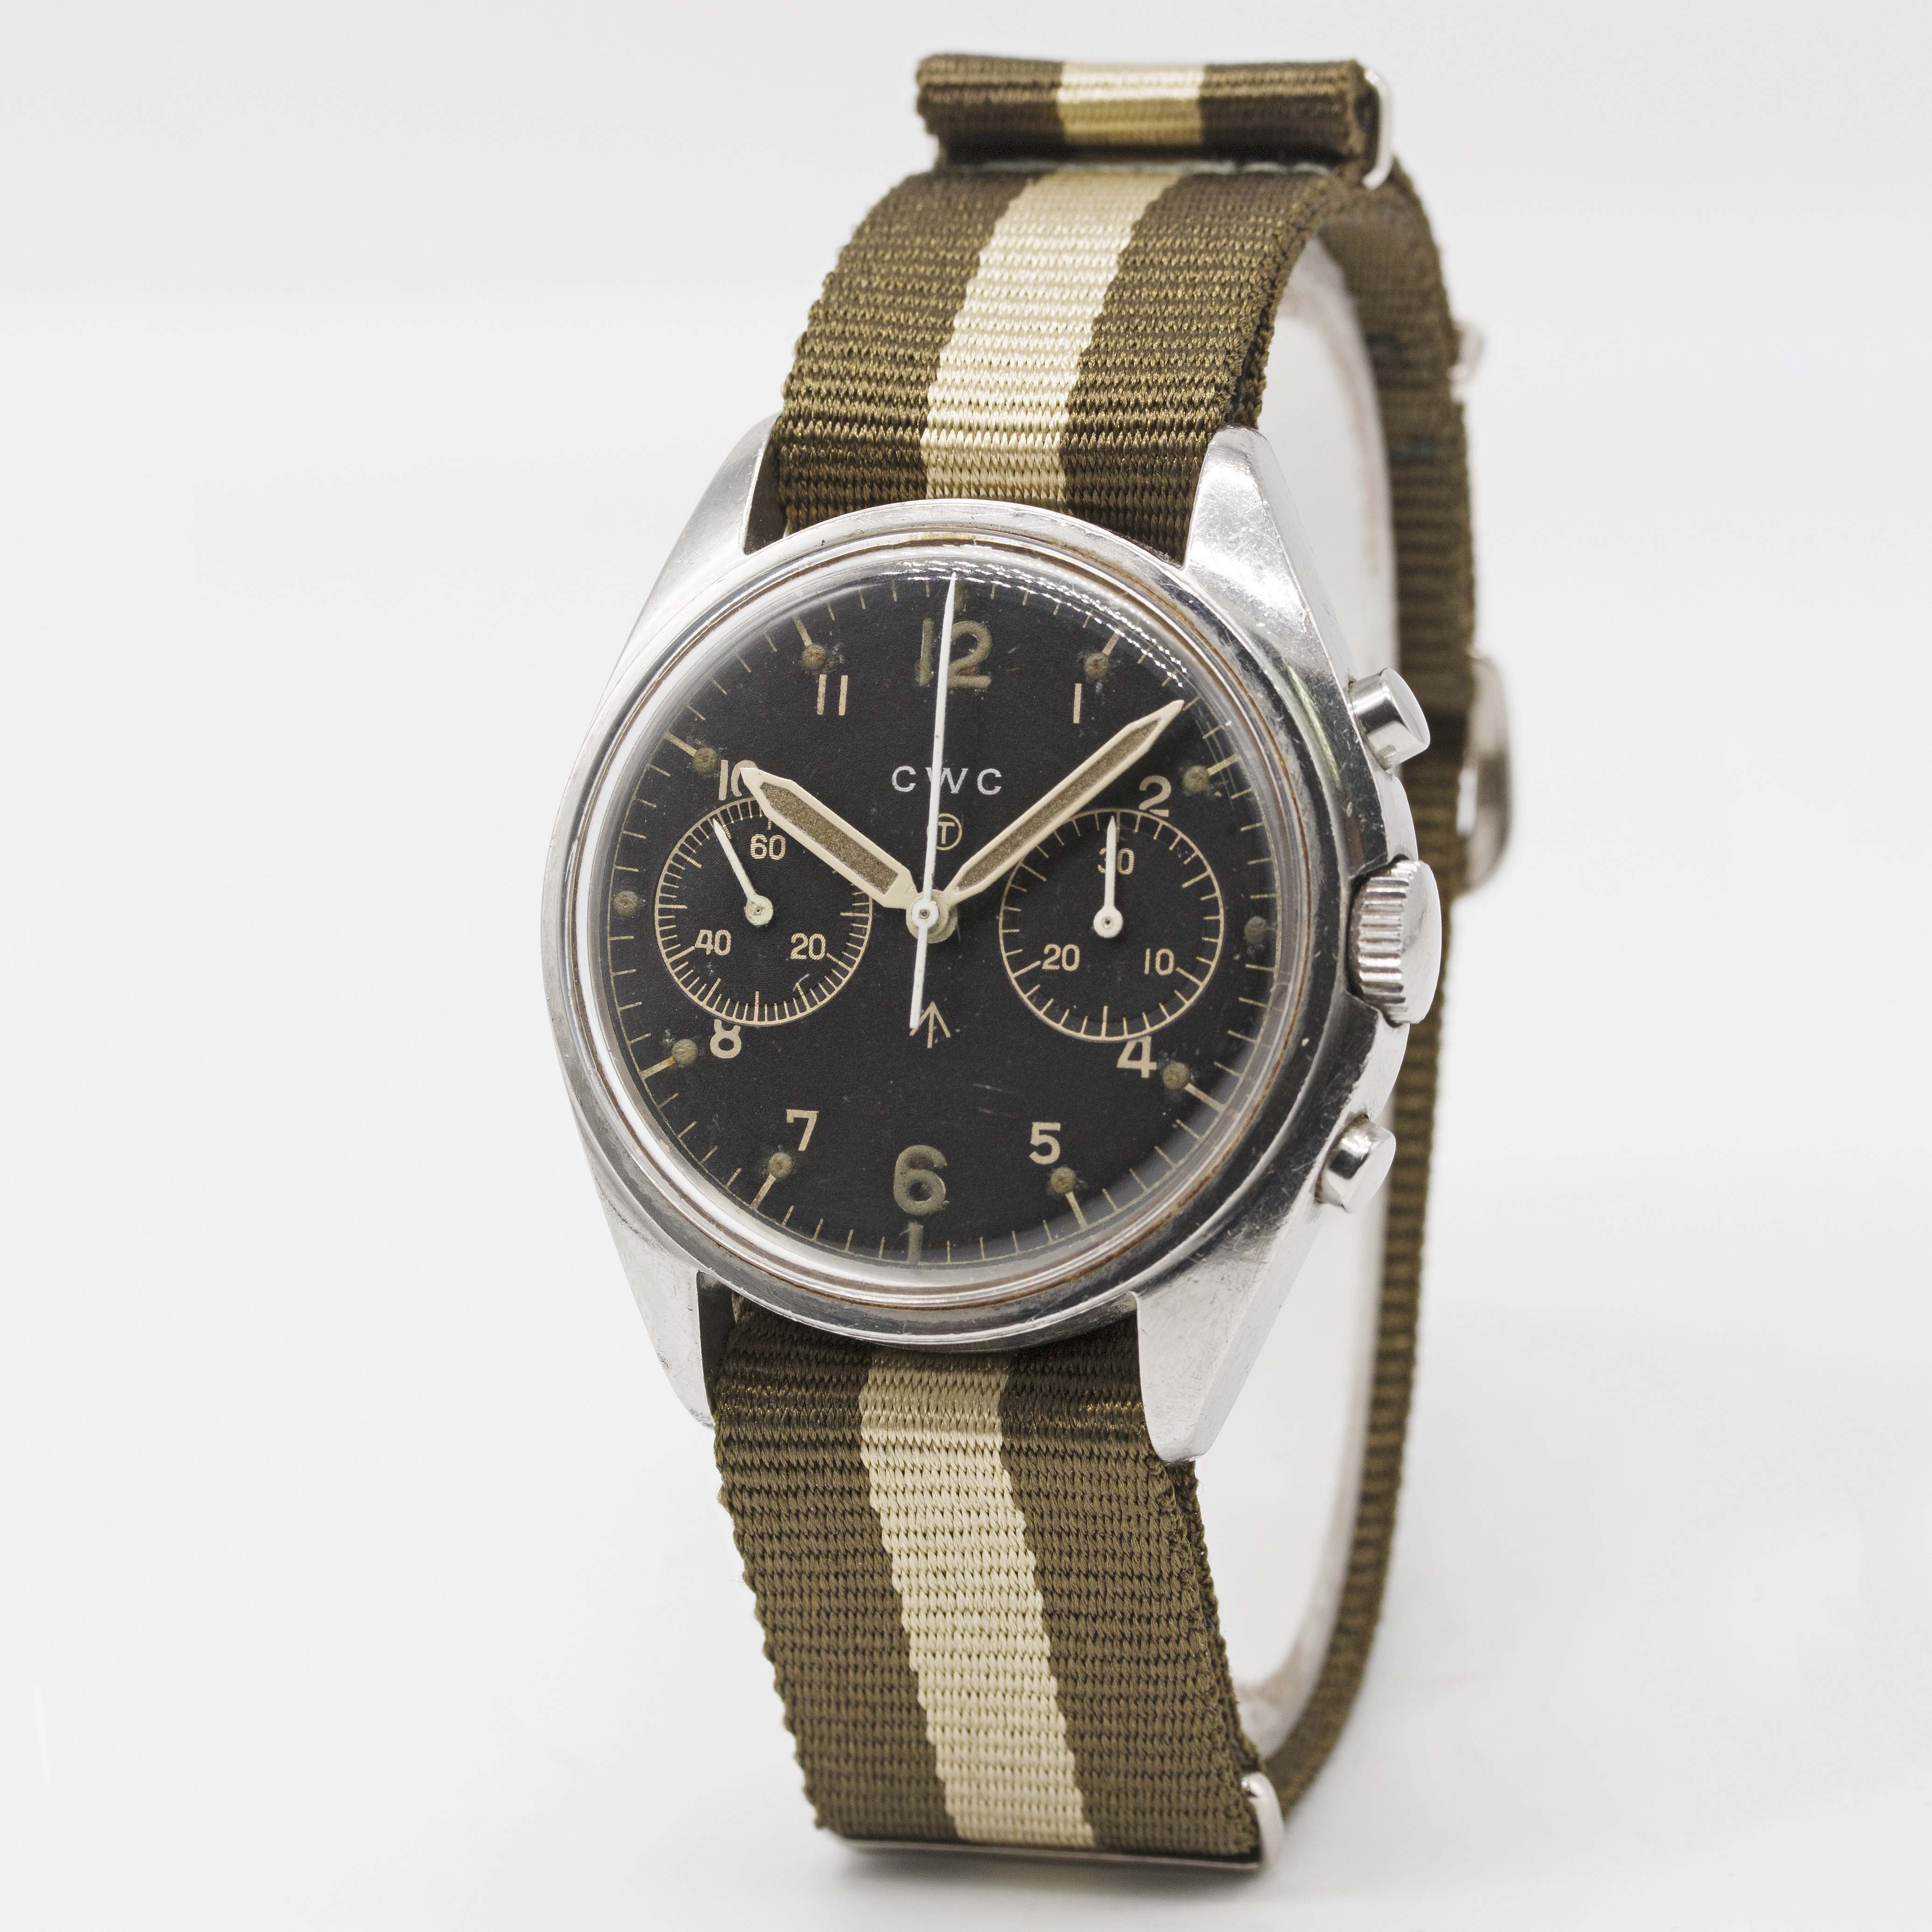 A GENTLEMAN'S STAINLESS STEEL BRITISH MILITARY CWC RAF PILOTS CHRONOGRAPH WRIST WATCH DATED 1974, - Image 2 of 4